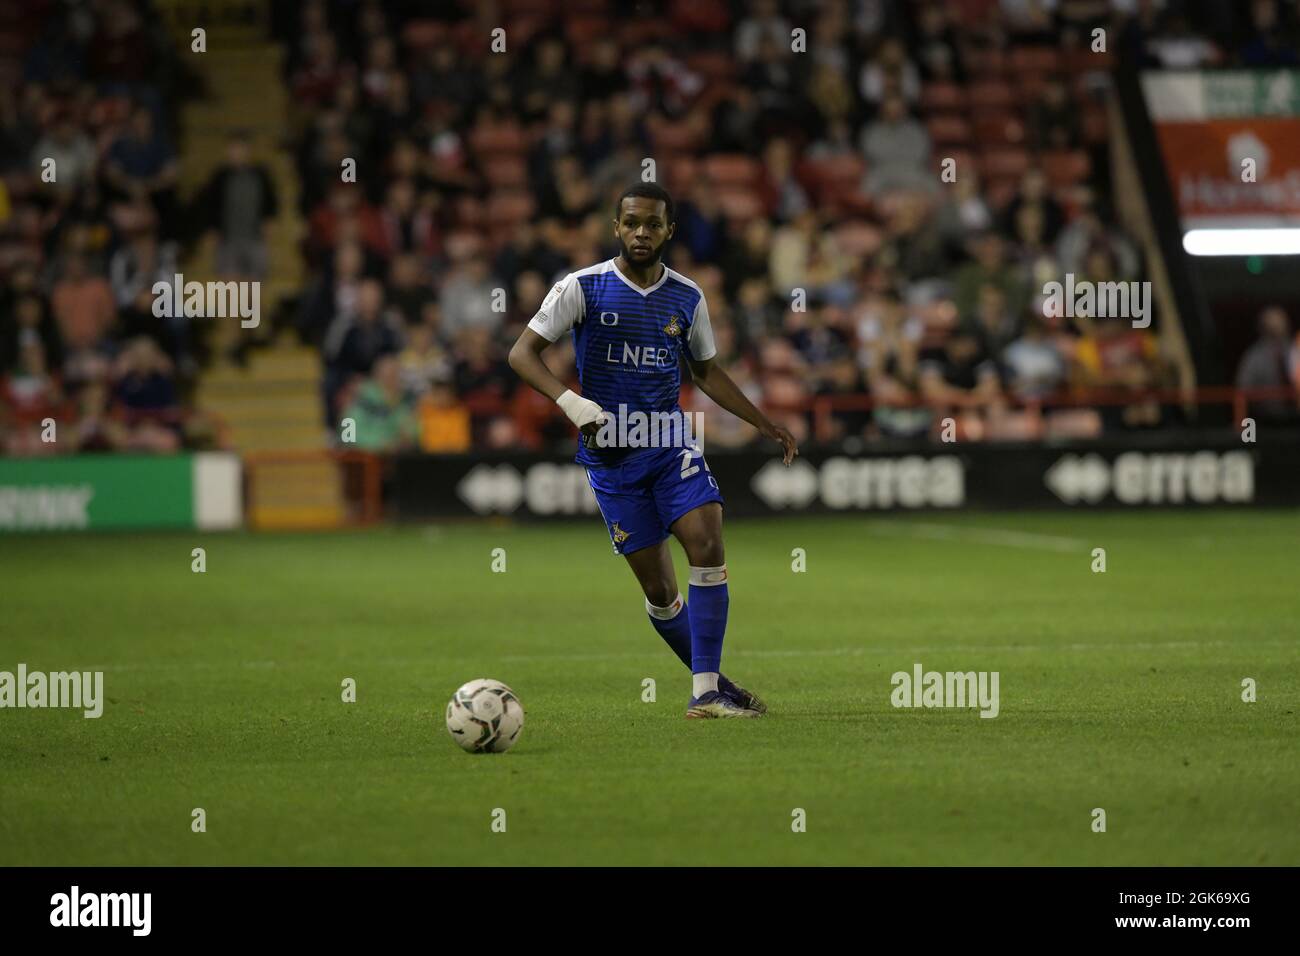 Picture Howard Roe/AHPIX LTD, Football, Carabao Cup;Round 1Walsall v Doncaster Rovers,; Bescot Stadium,Walsall, UK,10/08/2021, K.O 7.45pm Doncaster's Stock Photo